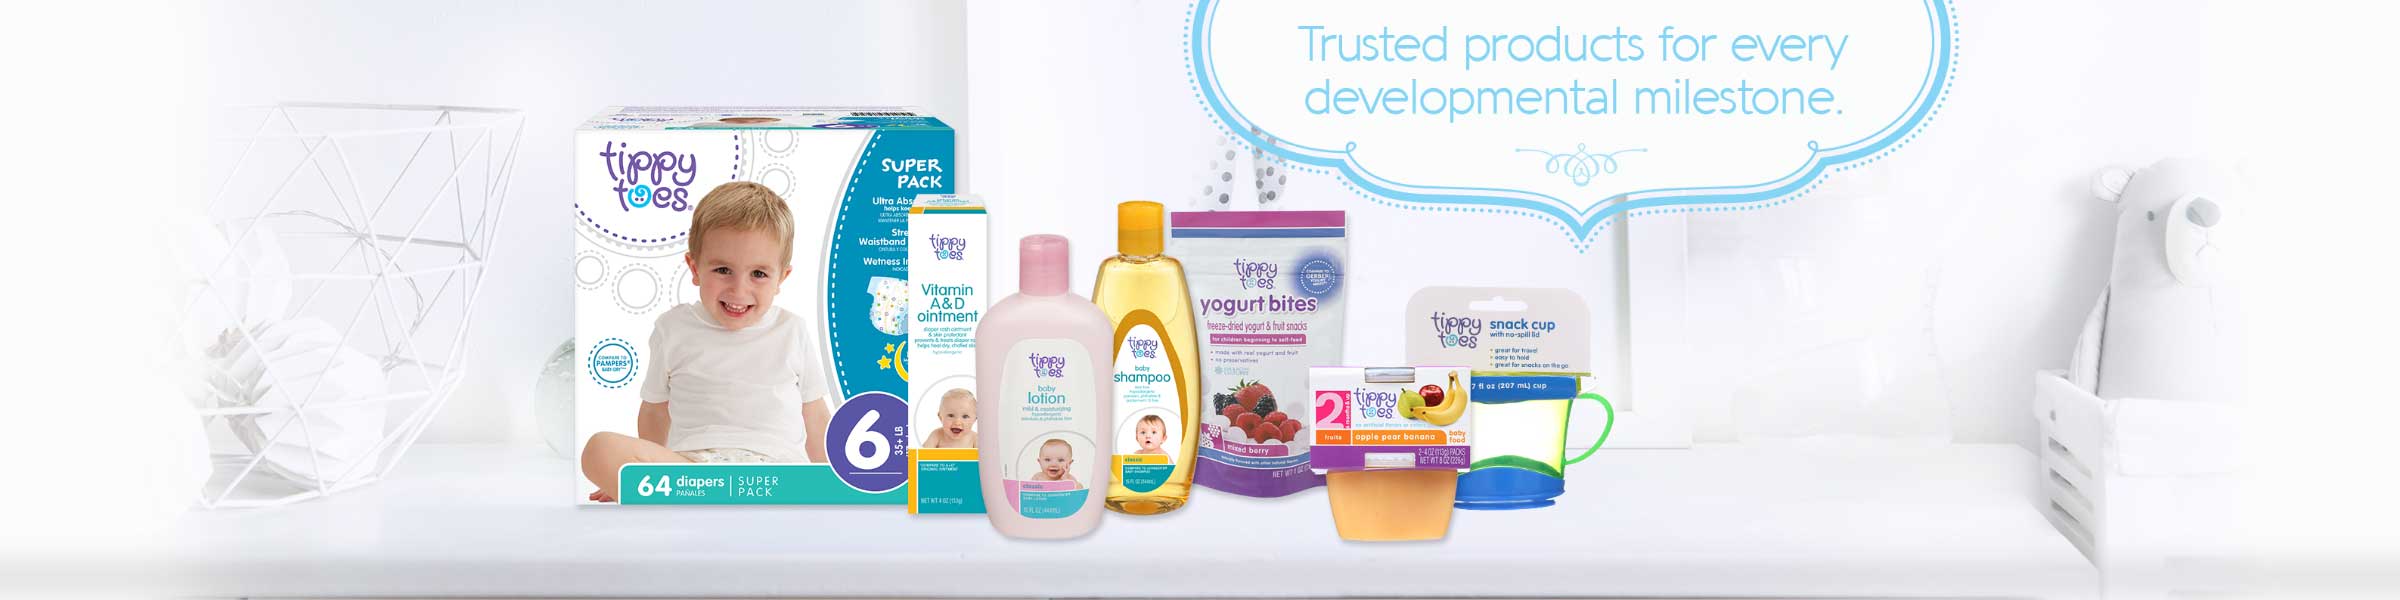 Trusted products for every developmental milestone.